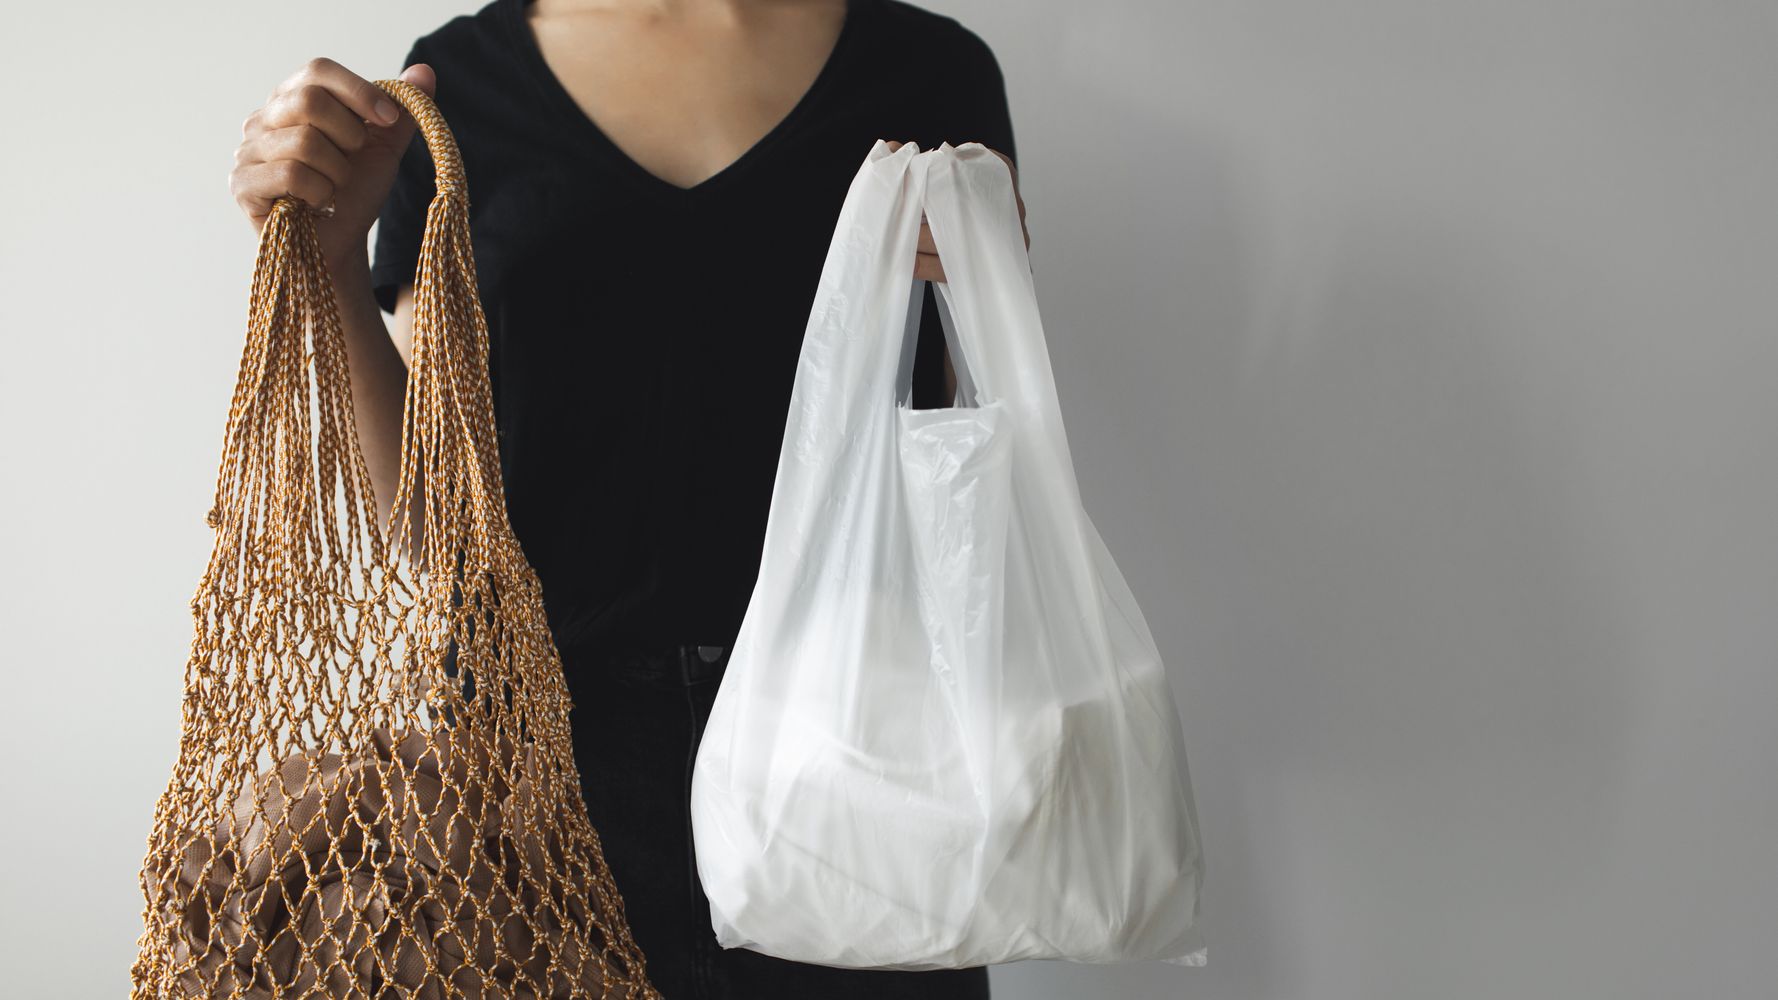 Do-it-yourself Plastic Tote Bag